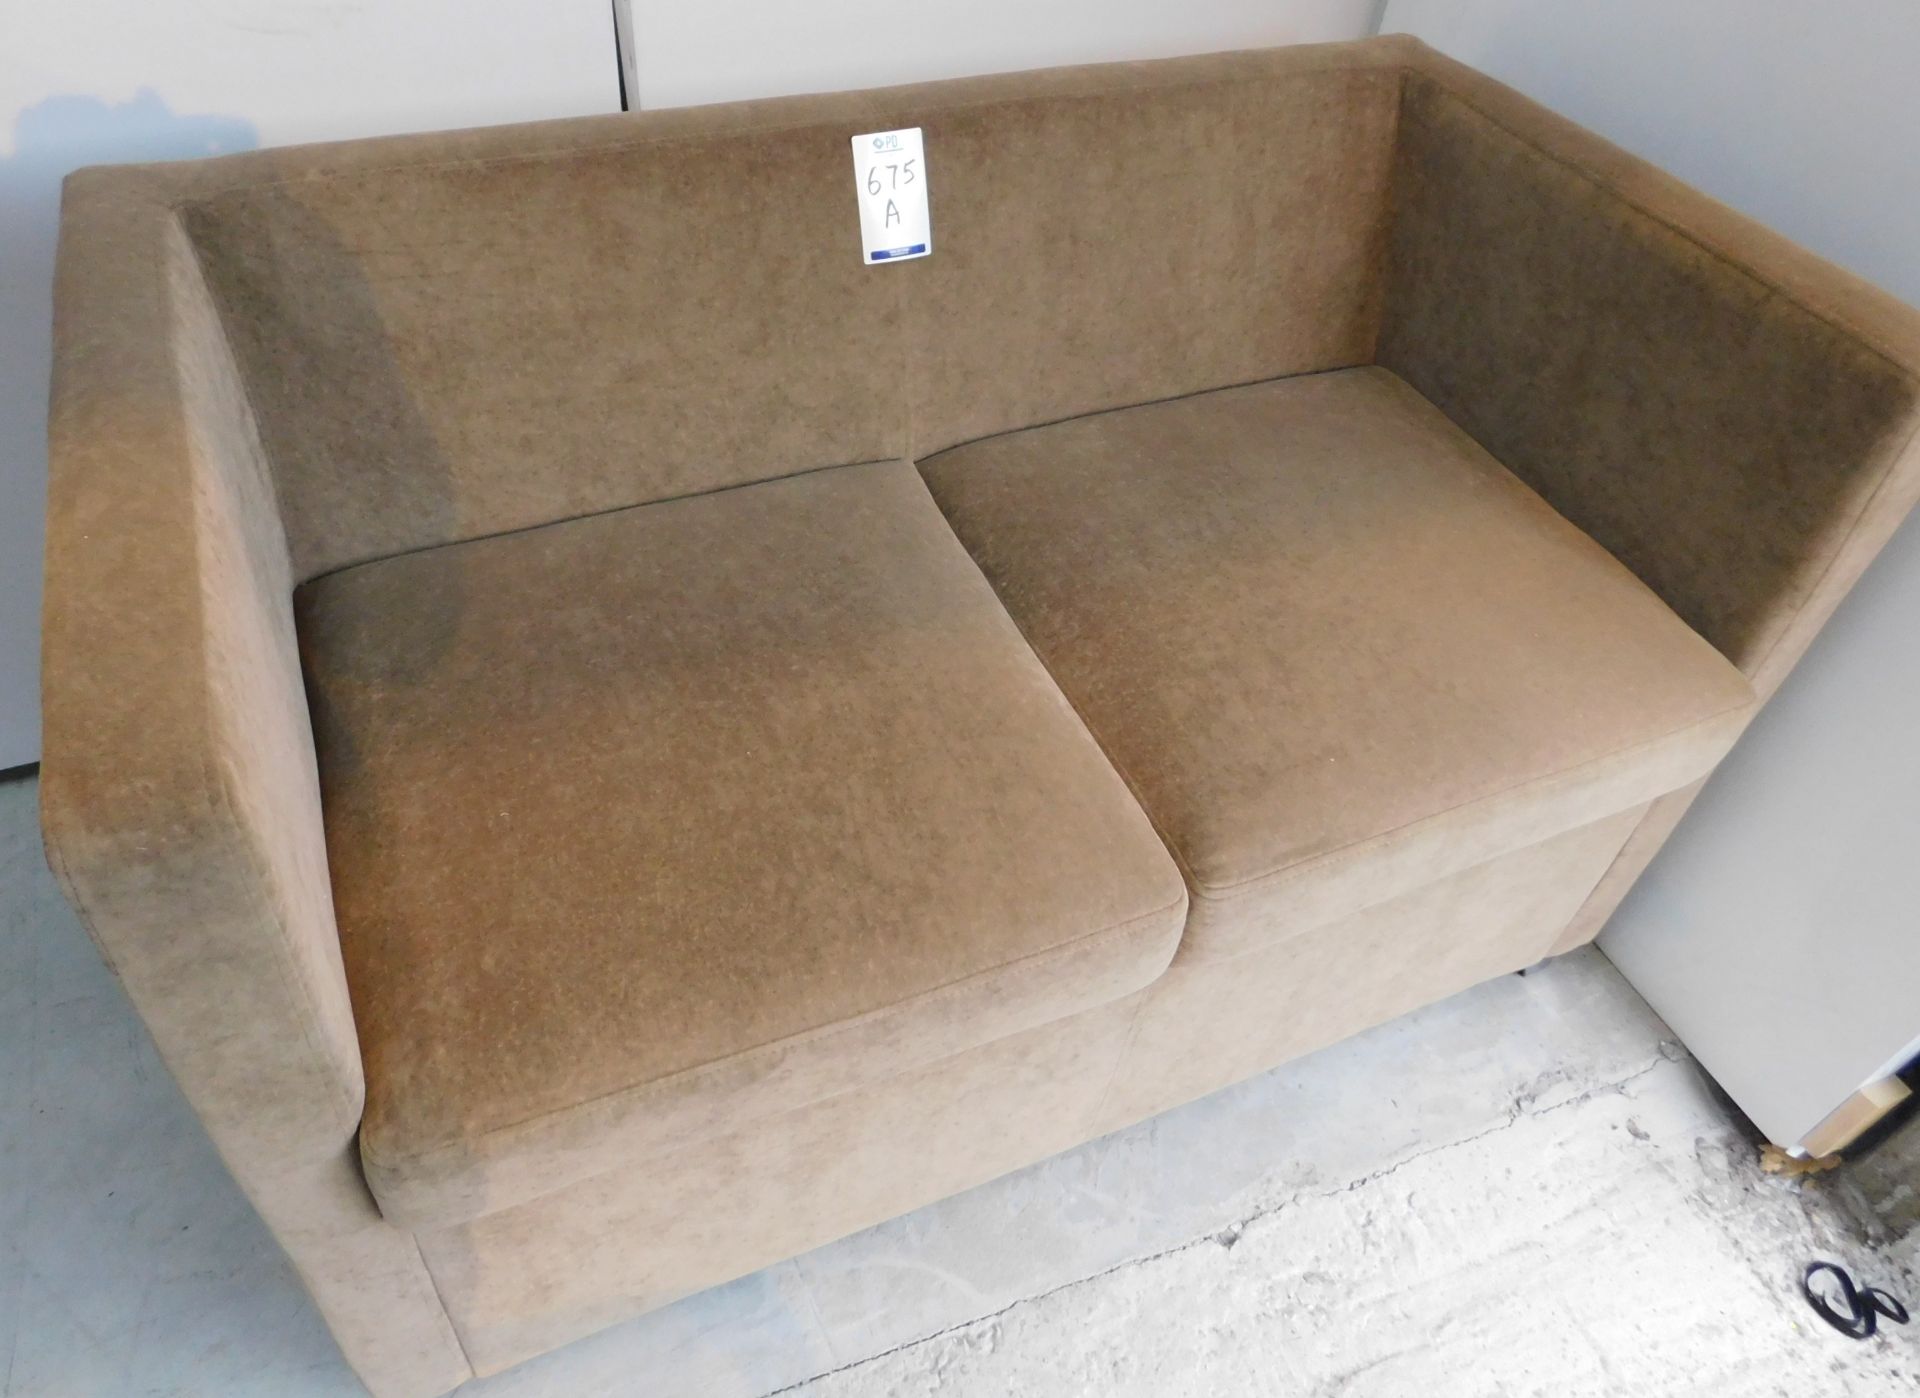 Jack Twin Seat Sofa, 120cm x 65cm (Located Bren2od - See General Notes for More Details)